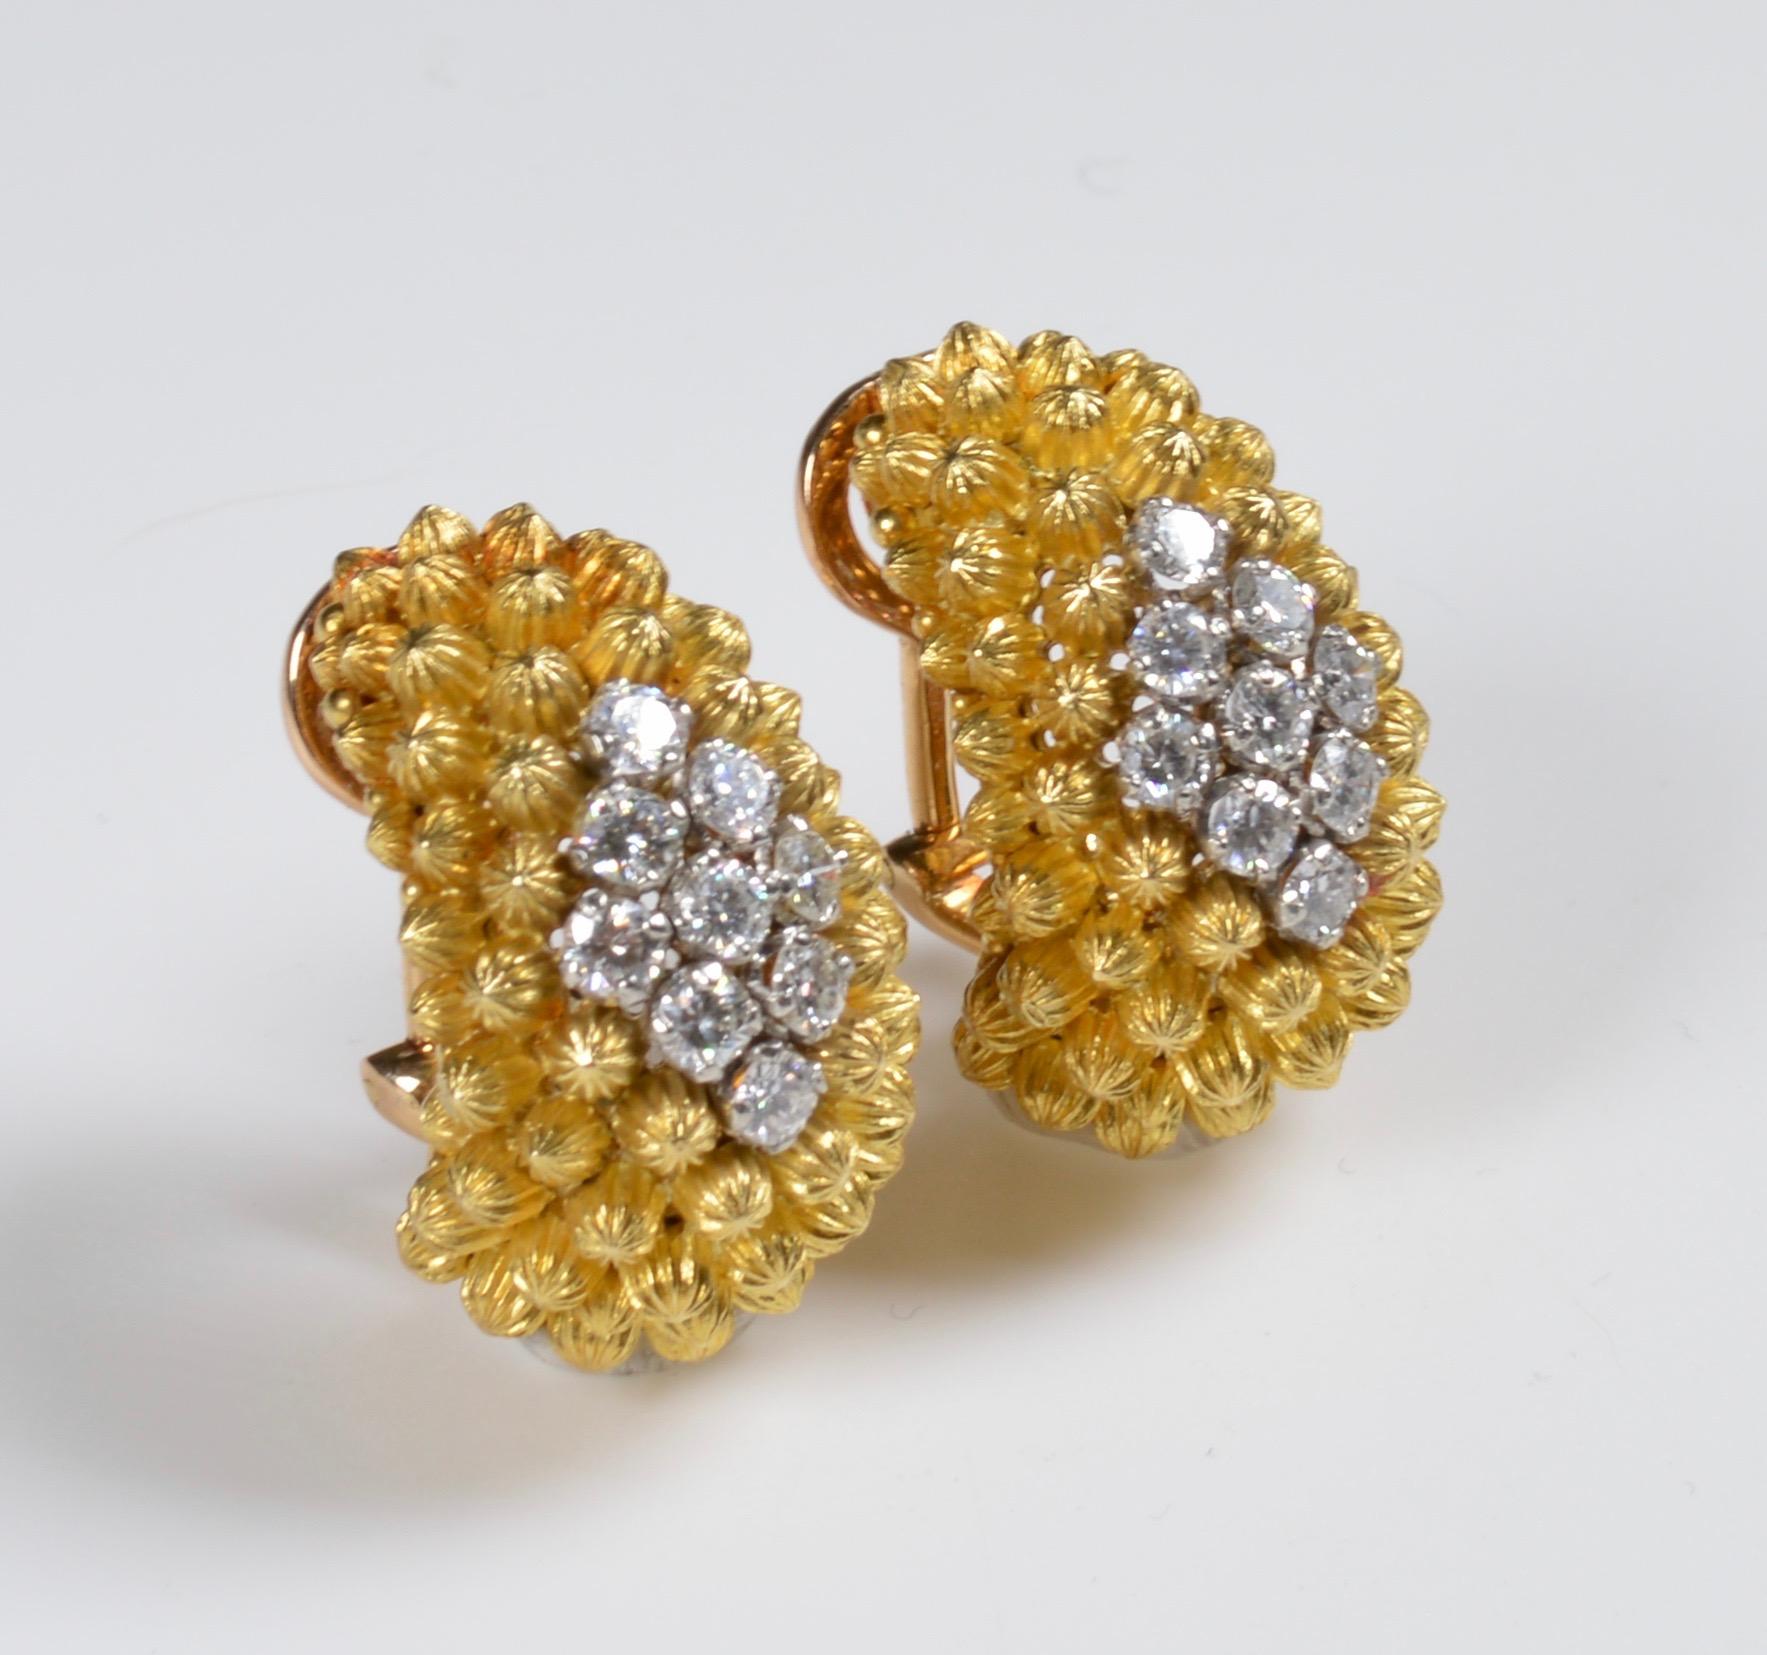 A Pair of 18 Karat Yellow Gold and Diamond Earclips, Italian, consisting of a tapered hoop design with fluted domes centered with 18 round brilliant cut diamonds of navette shaped clusters weighing approximately 1.60 carats 
Stamp: 750 (Italian